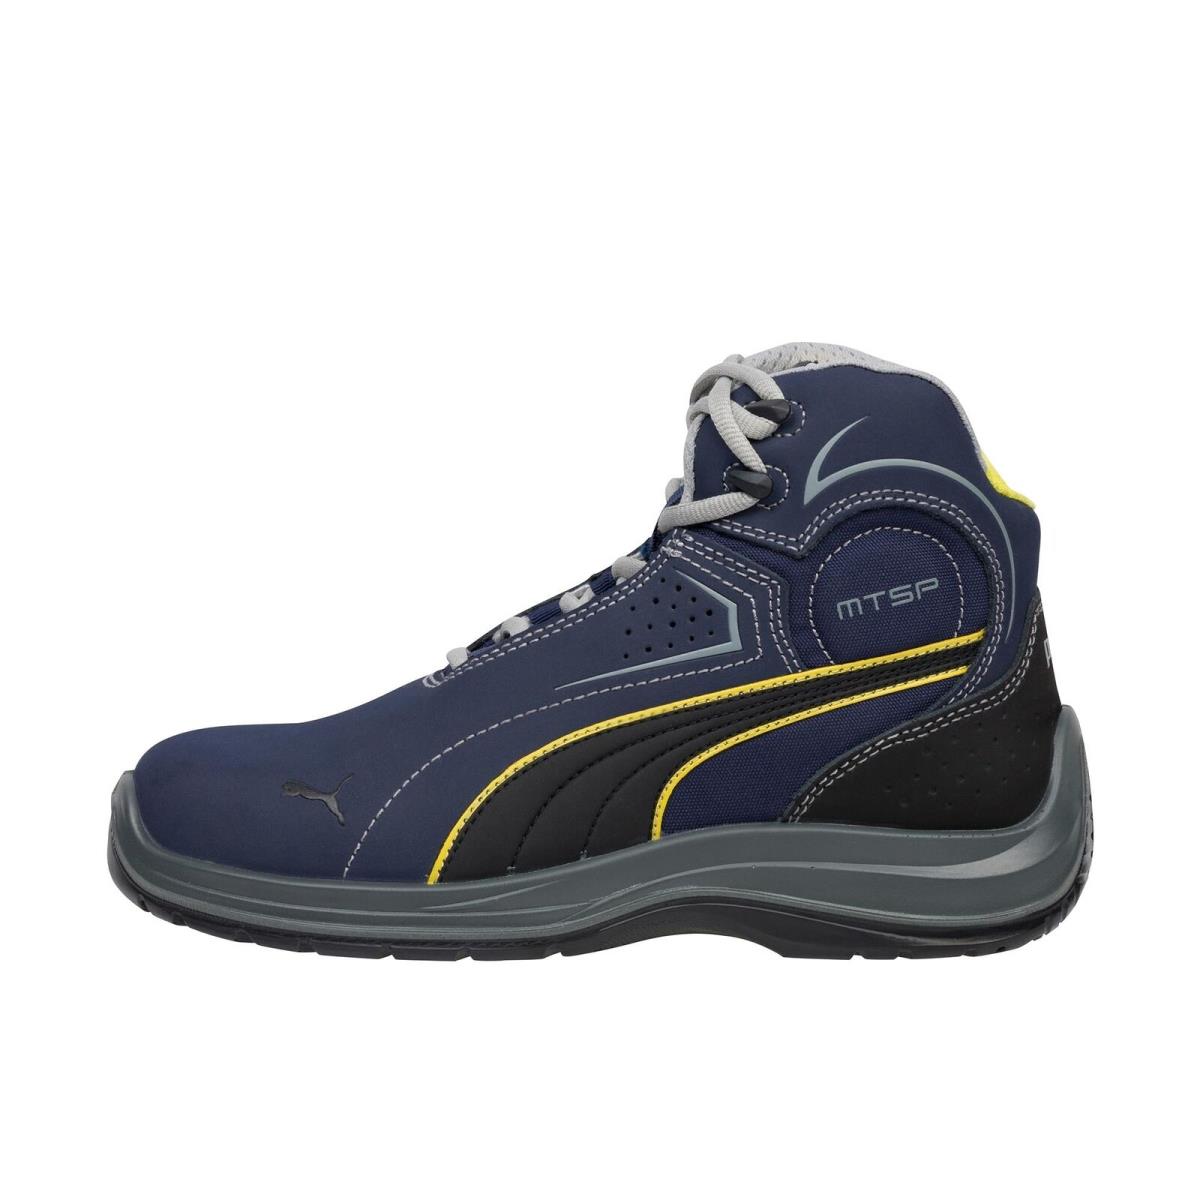 Puma Safety Touring Mid Composite Toe Blue